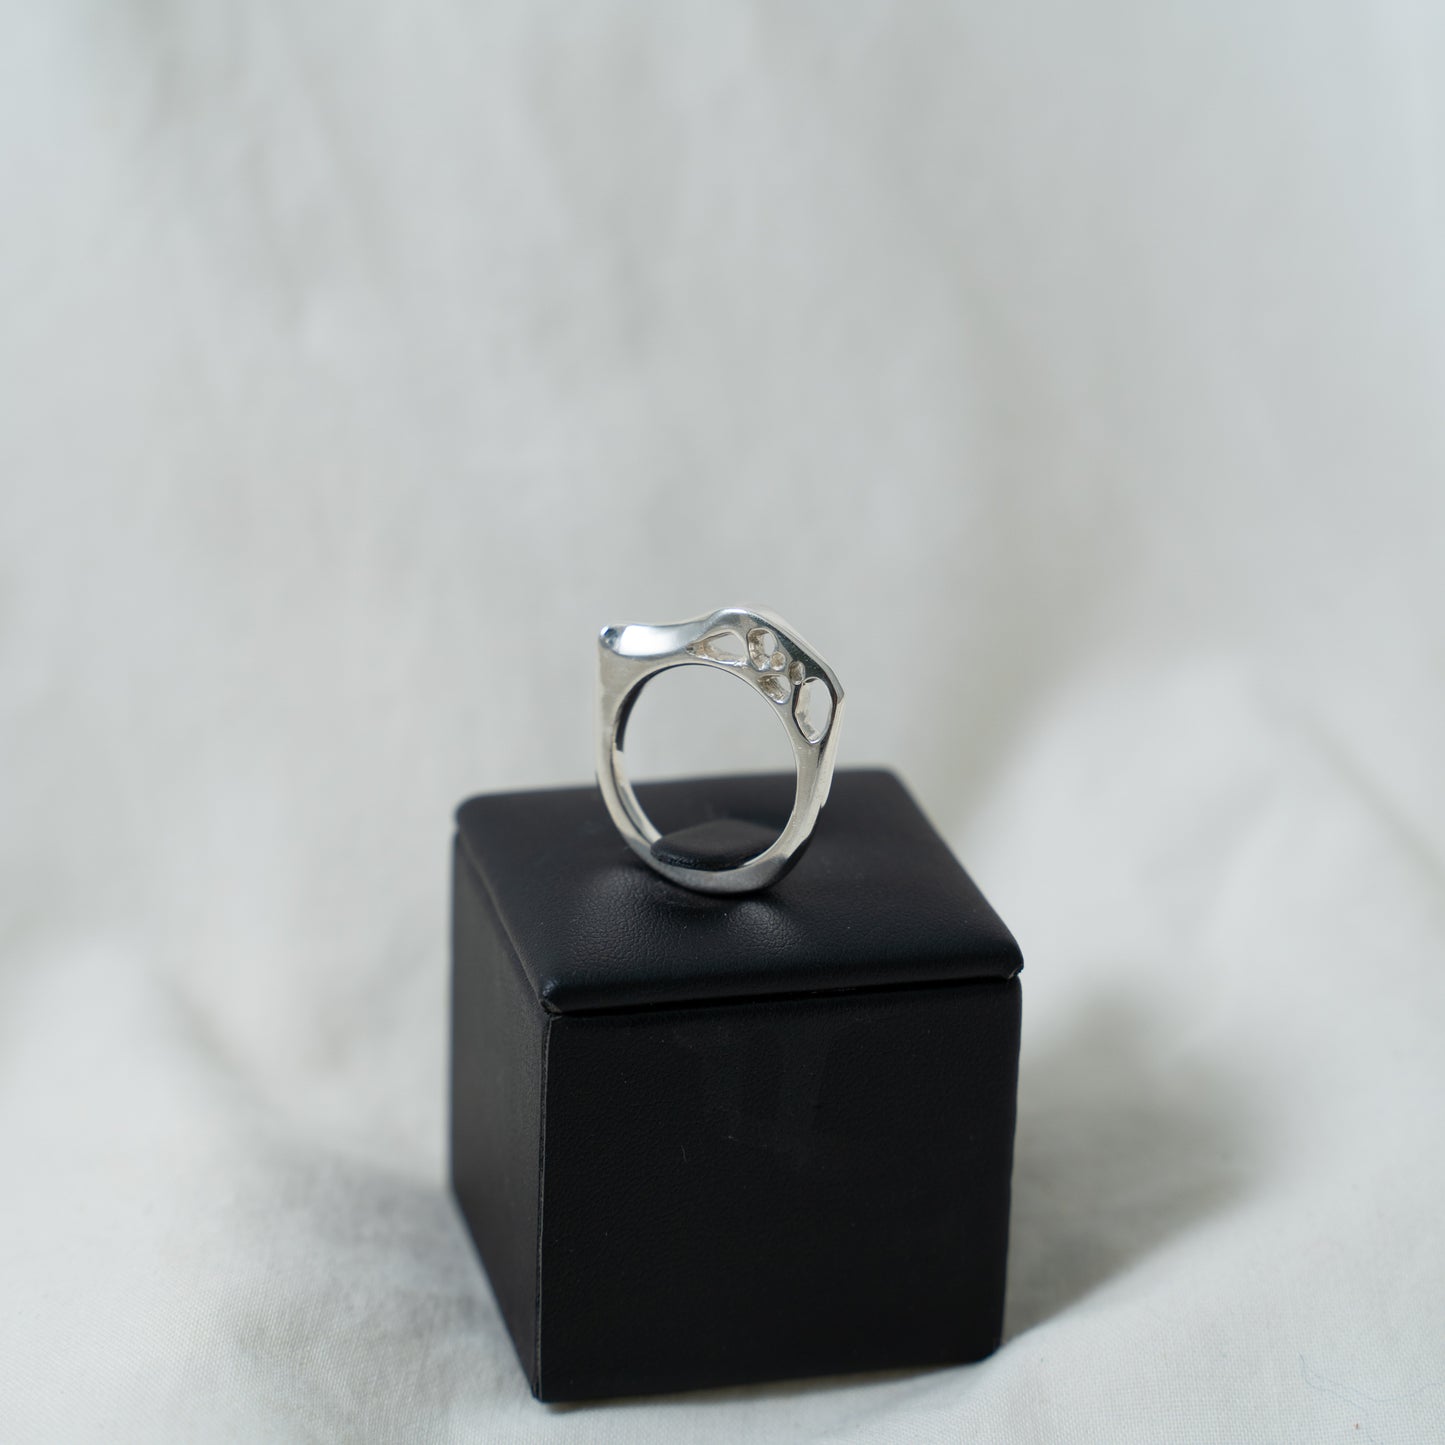 The holey silver signet ring